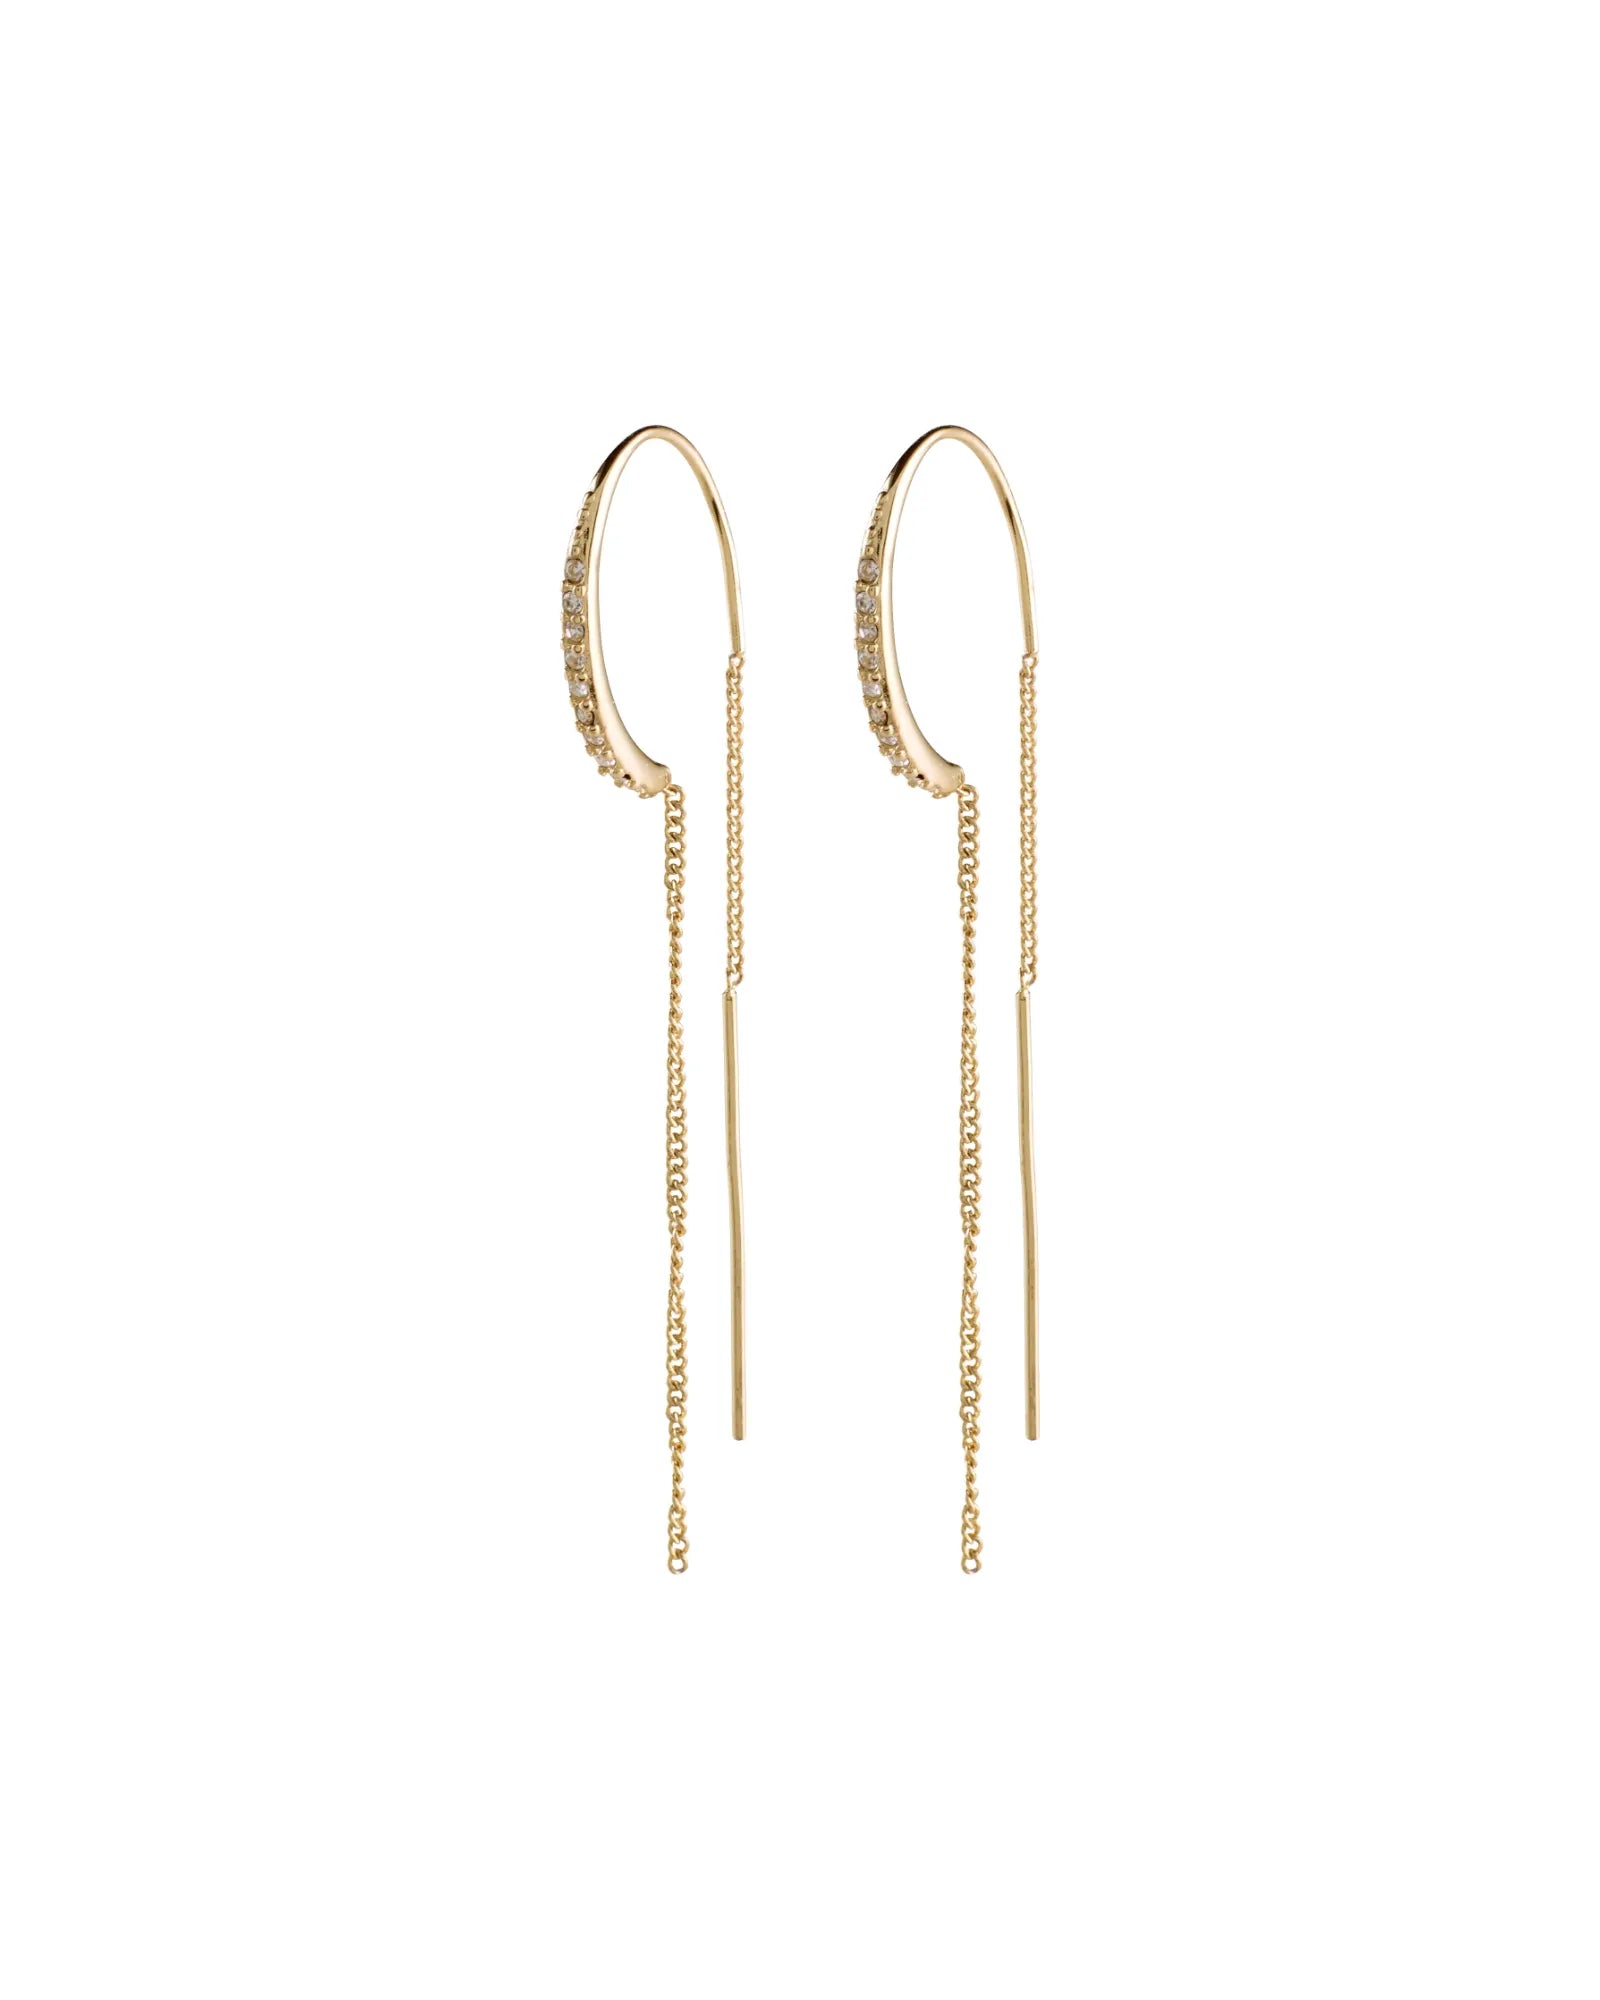 Fire Crystal Earrings - Gold Plated